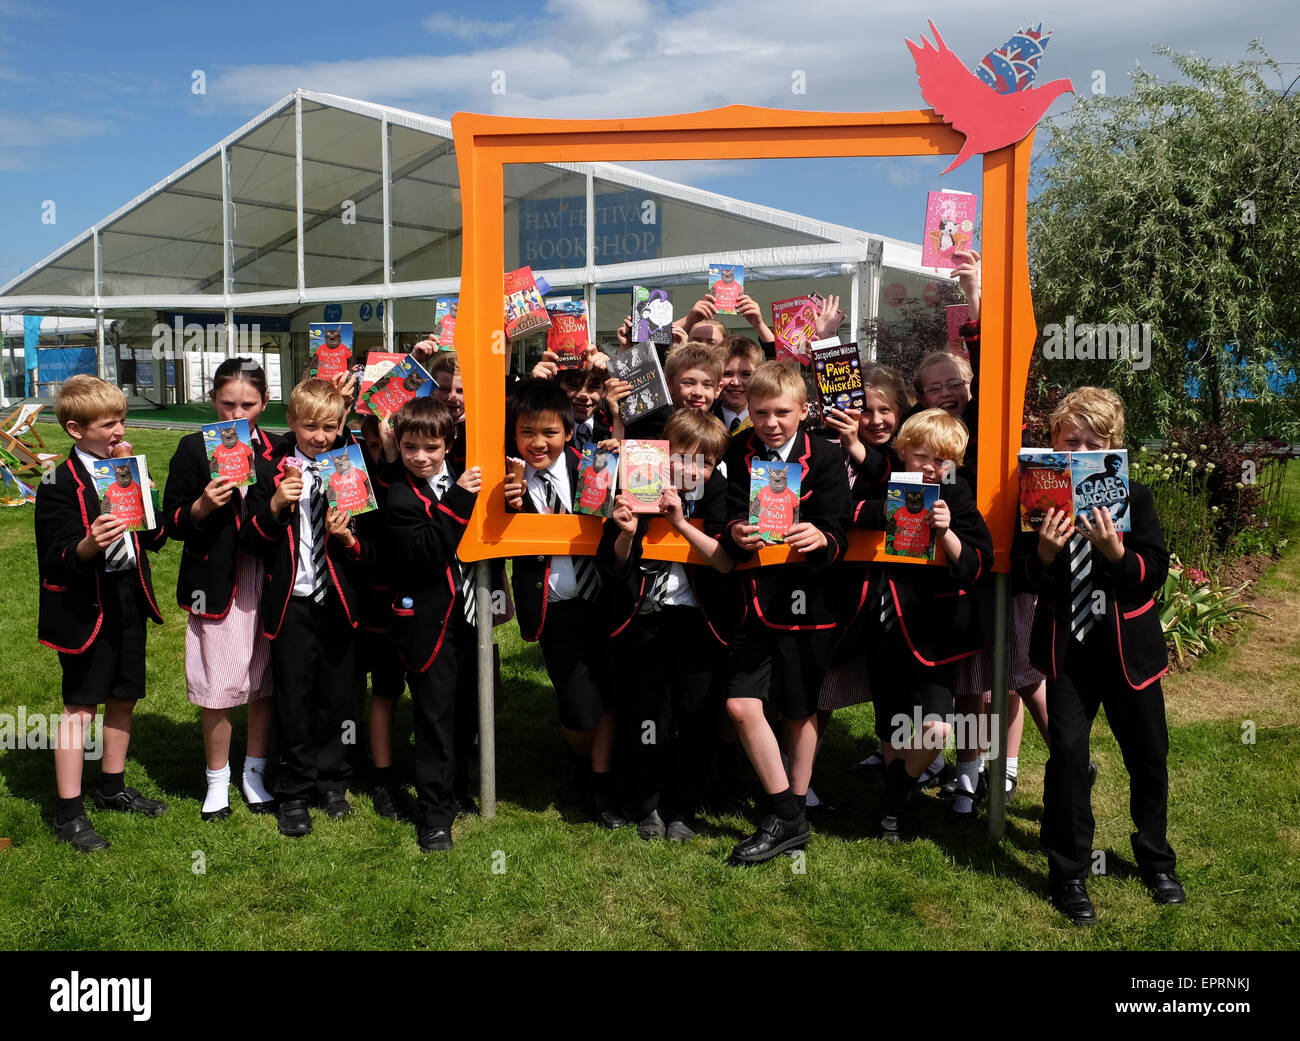 Hay Festival, Powys, Wales, UK. 21st May, 2015. Opening day for the 2015 Hay Festival. Children from Lucton Preparatory School, Herefordshire attend the first day of the Festival and show the books they have bought. Stock Photo